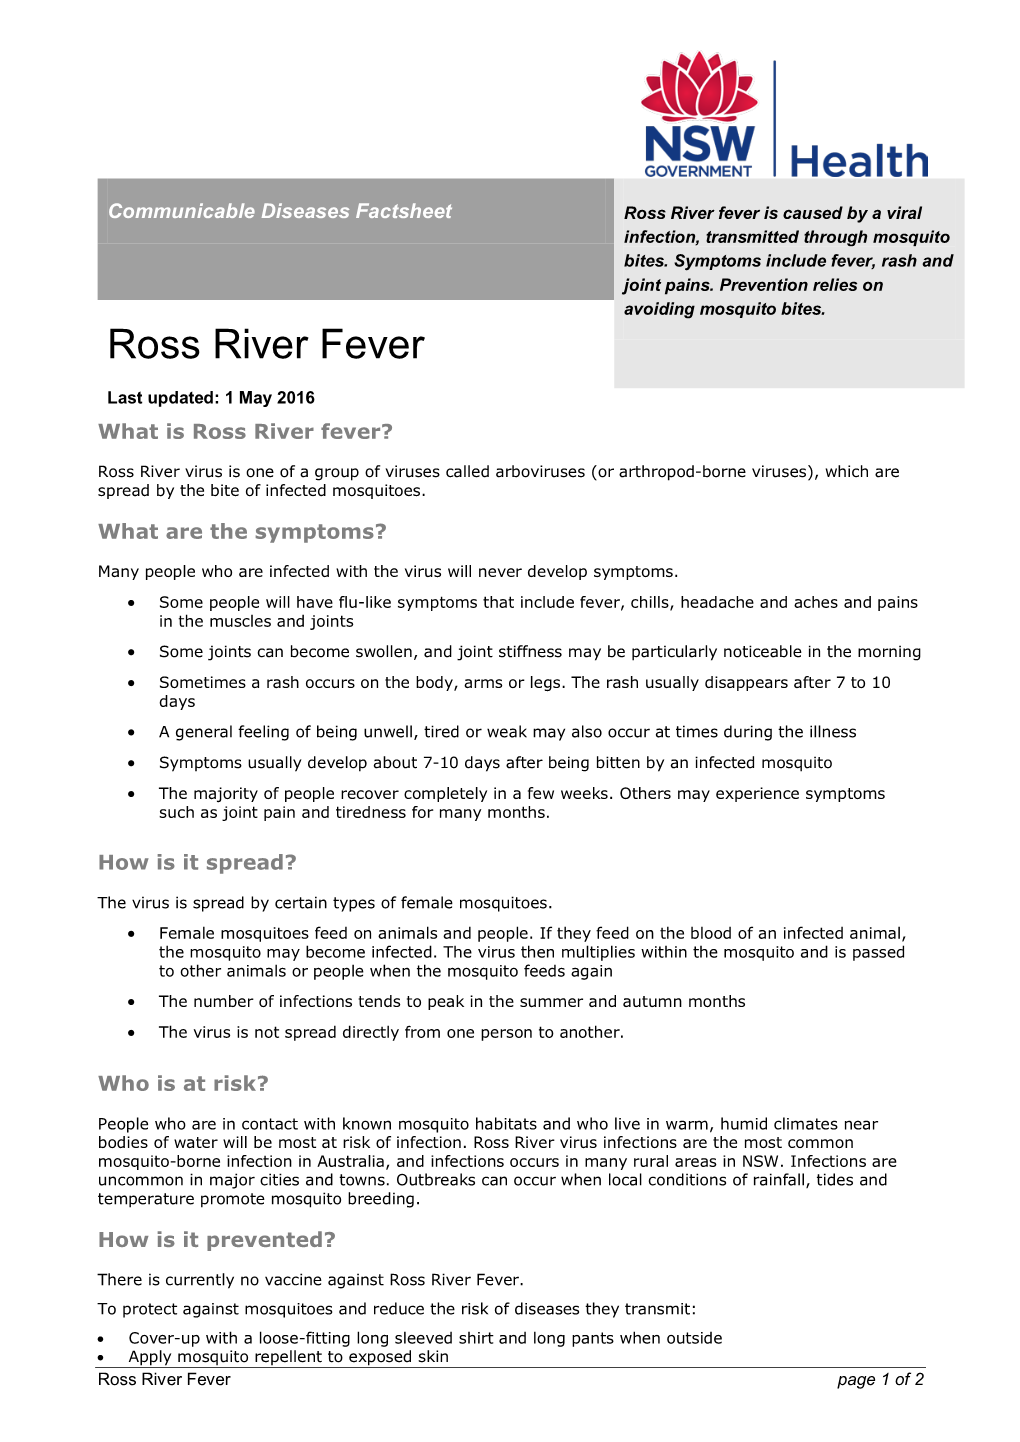 Ross River Virus Is One of a Group of Viruses Called Arboviruses (Or Arthropod-Borne Viruses), Which Are Spread by the Bite of Infected Mosquitoes